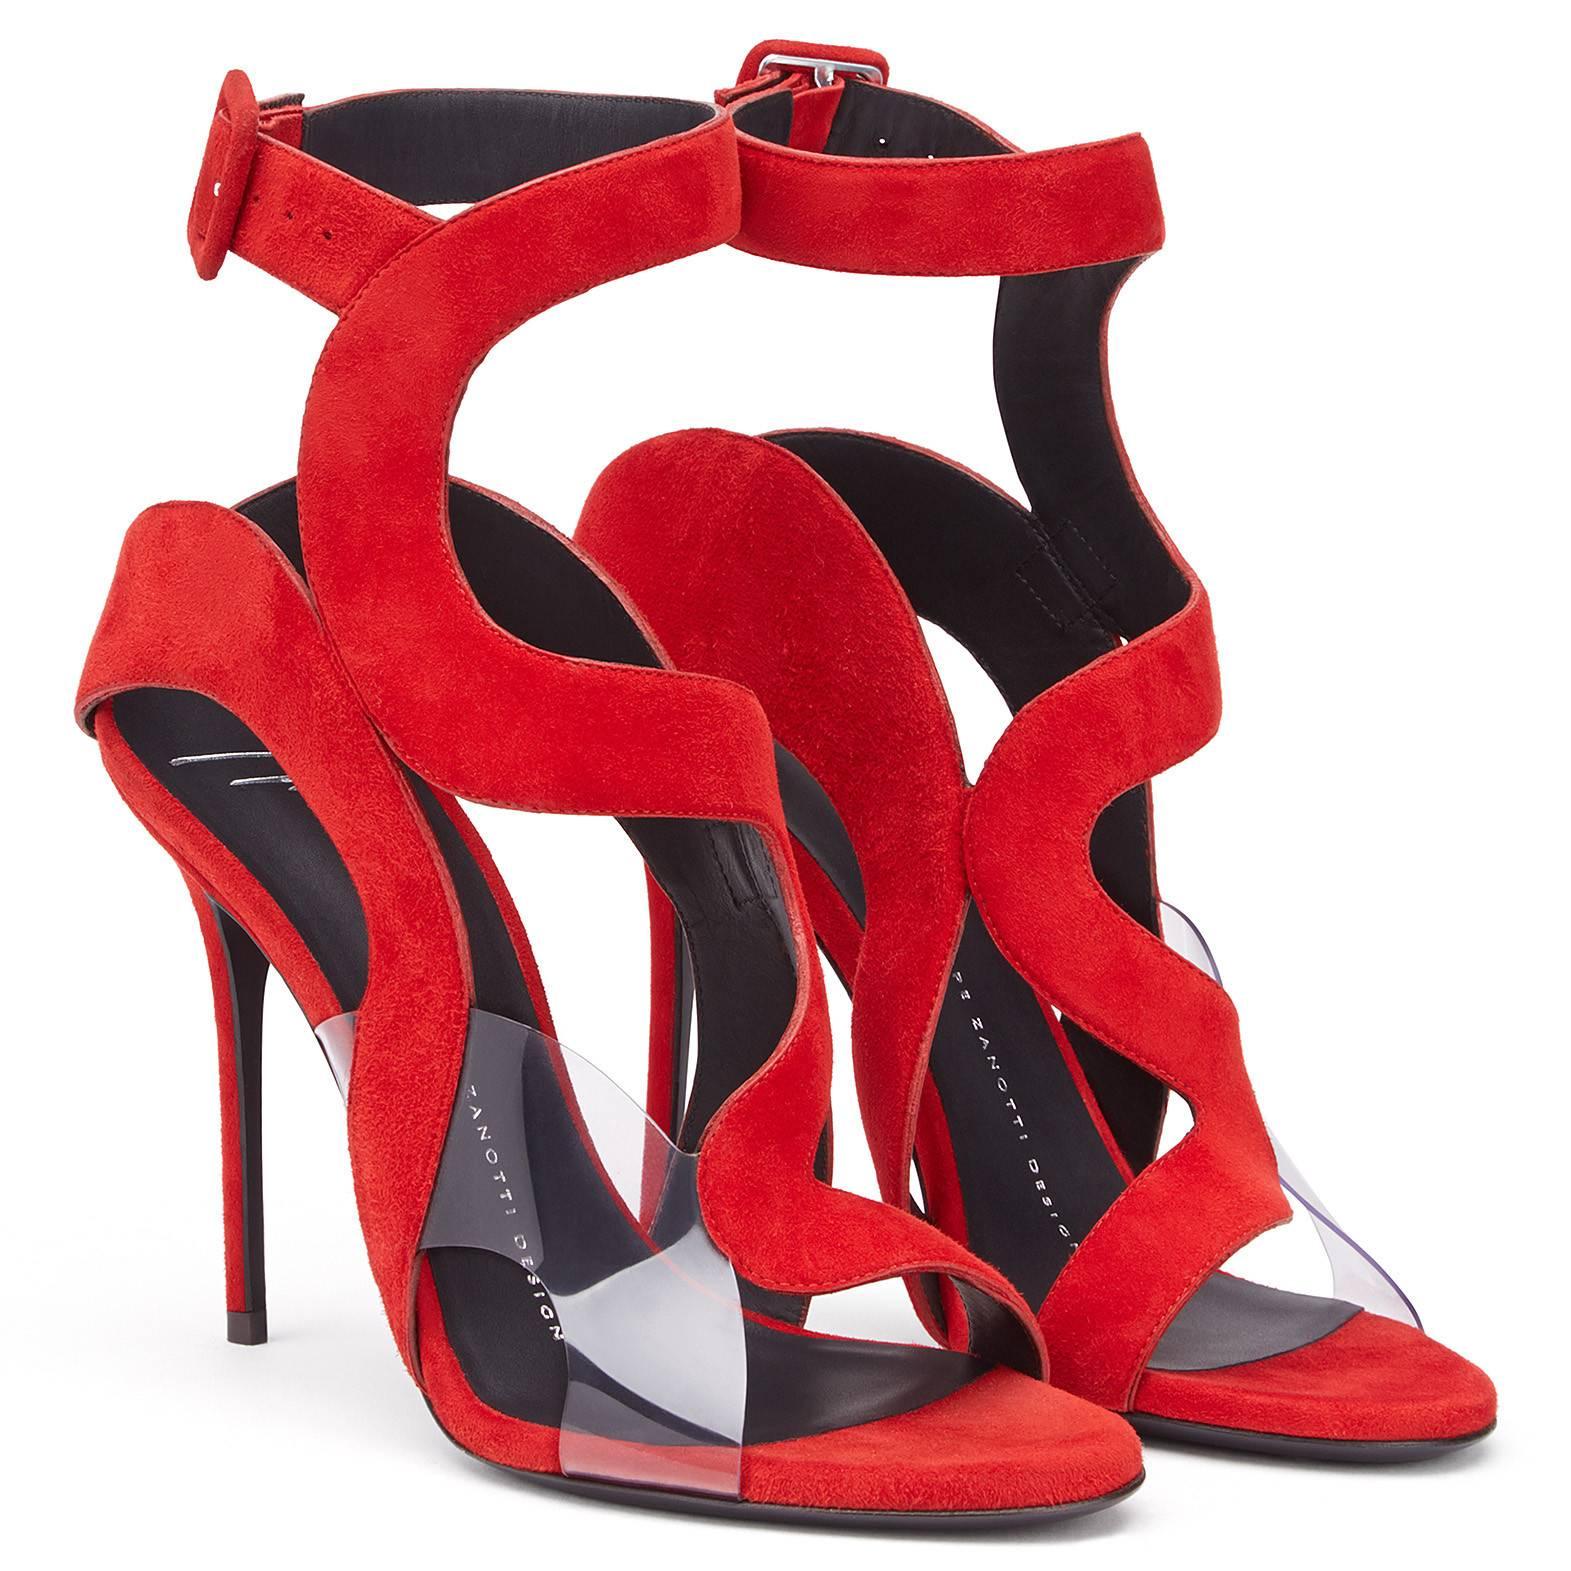 Women's Giuseppe Zanotti NEW Red Suede Cut Out Clear PVC Evening Sandals Heels in Box